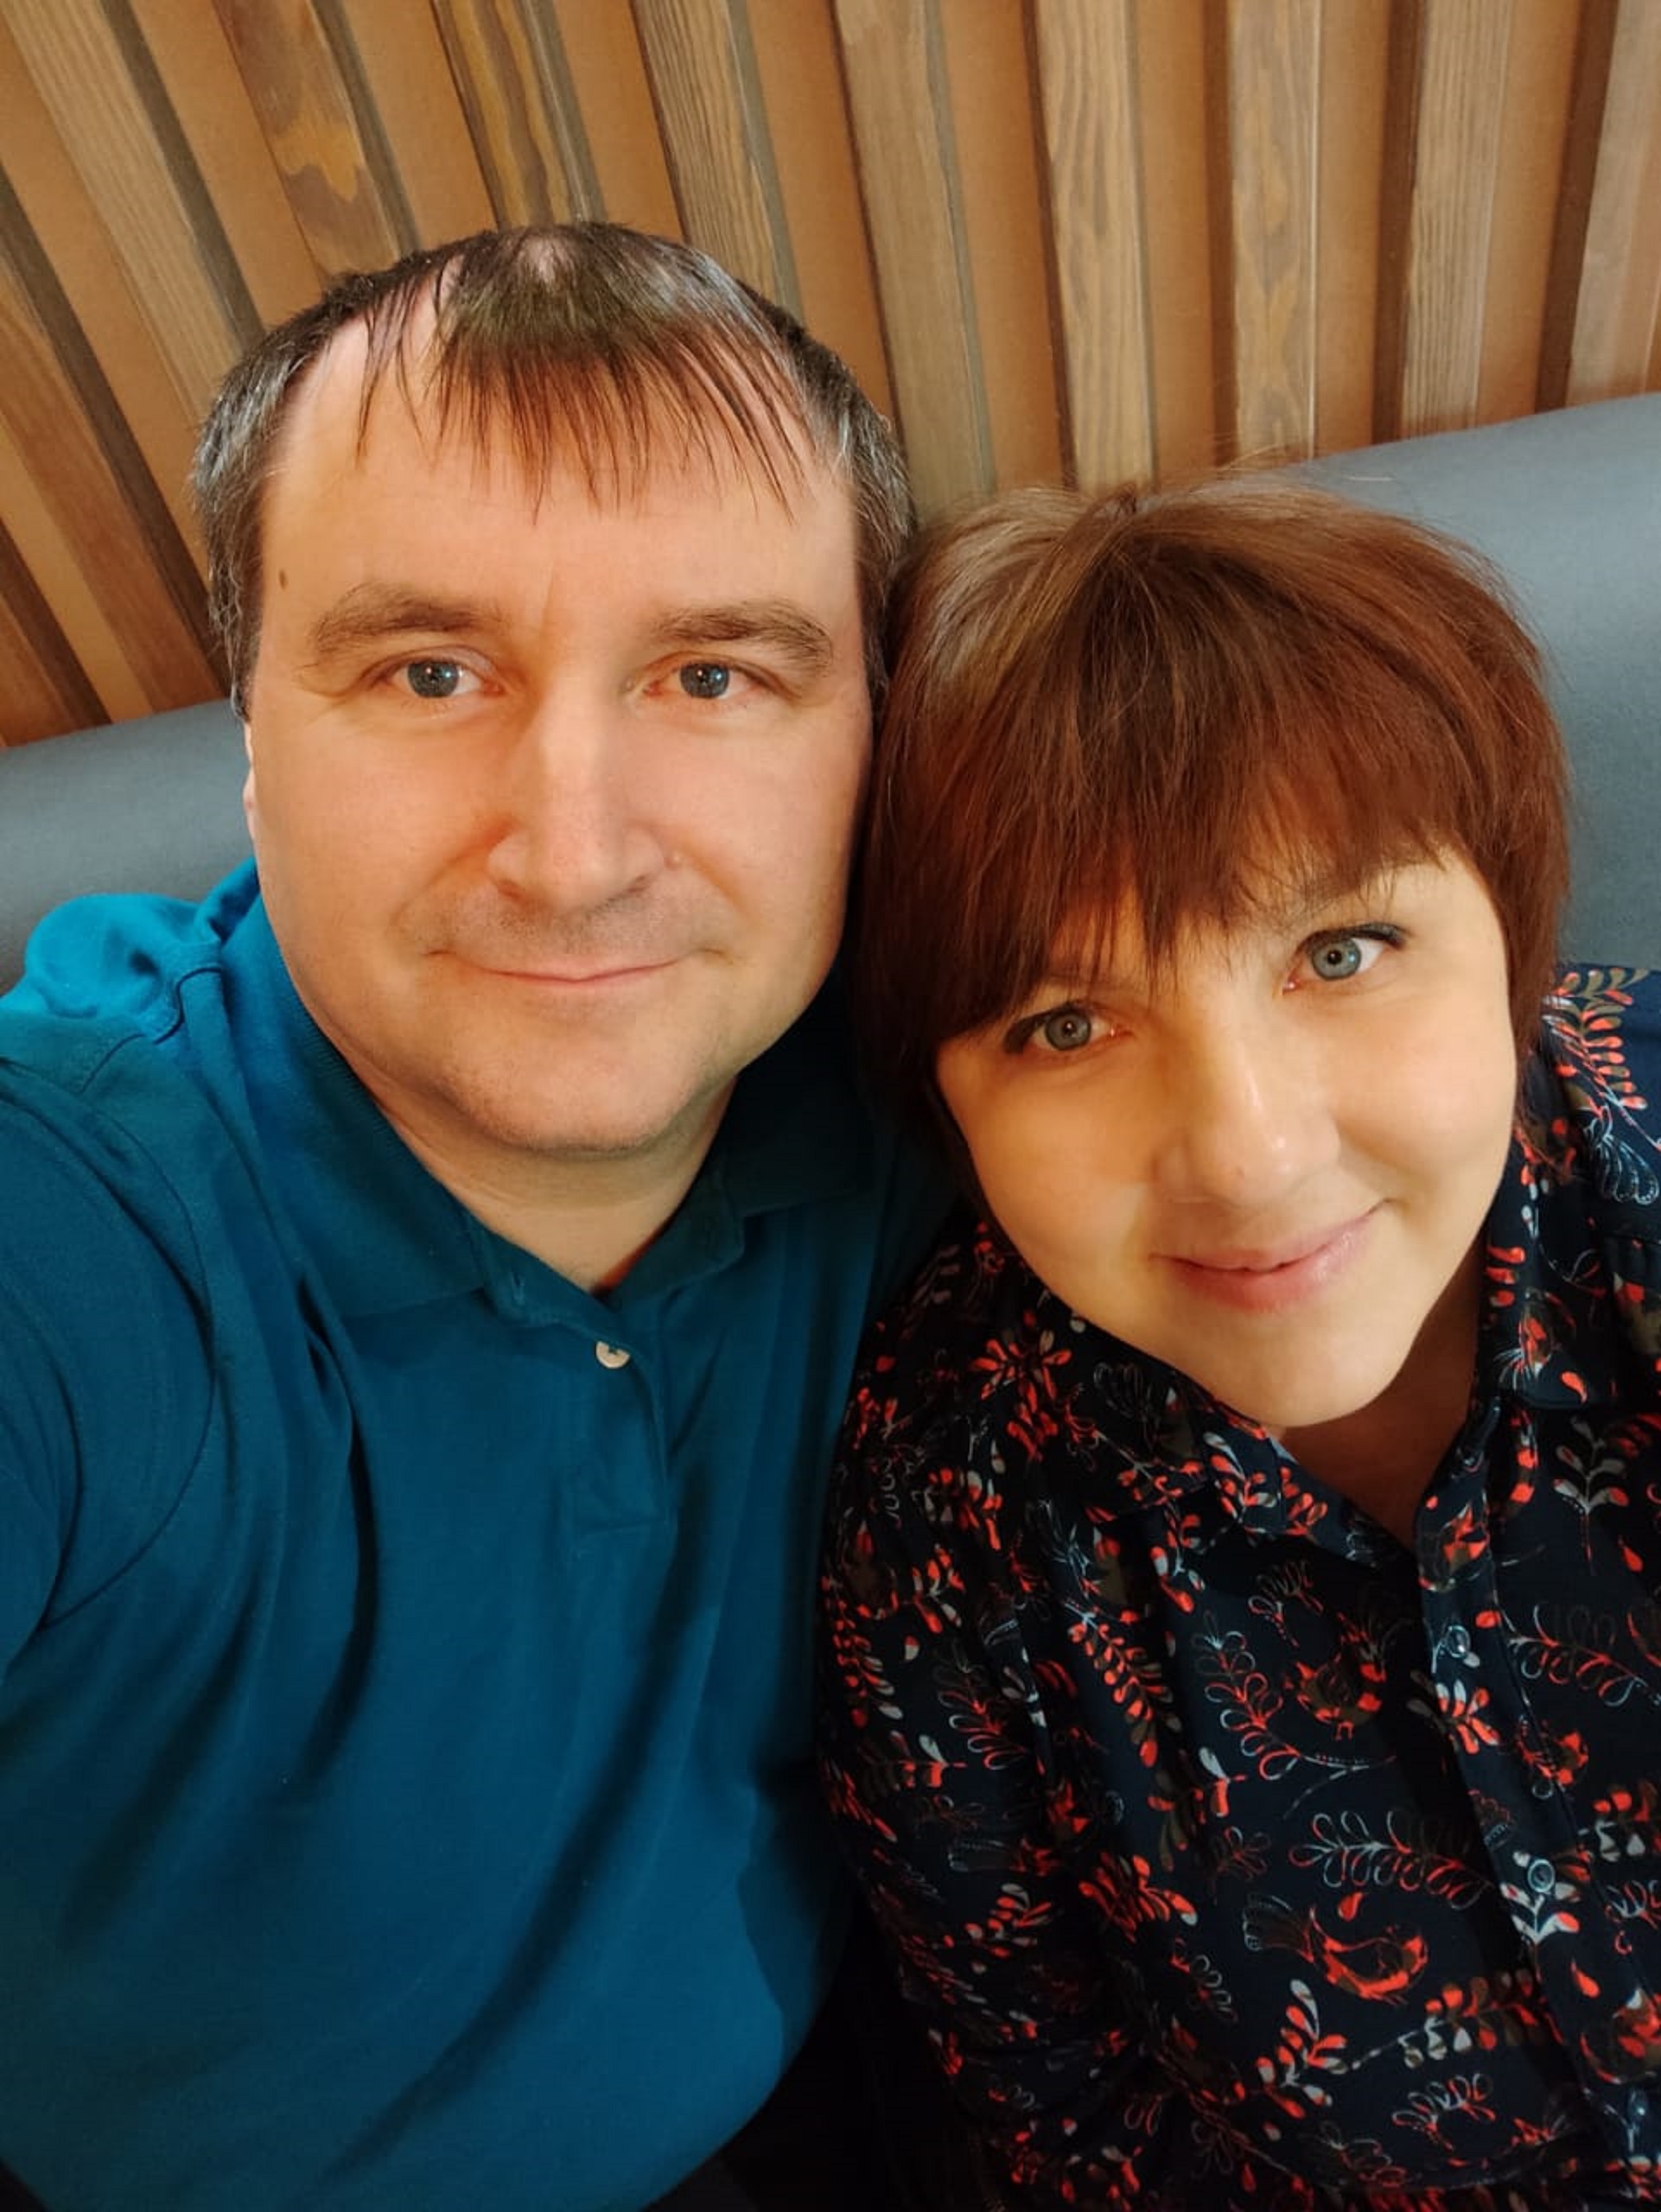 Luda Sviridok and her husband Sergey - the family has been separated by the Russian invasion of Ukraine